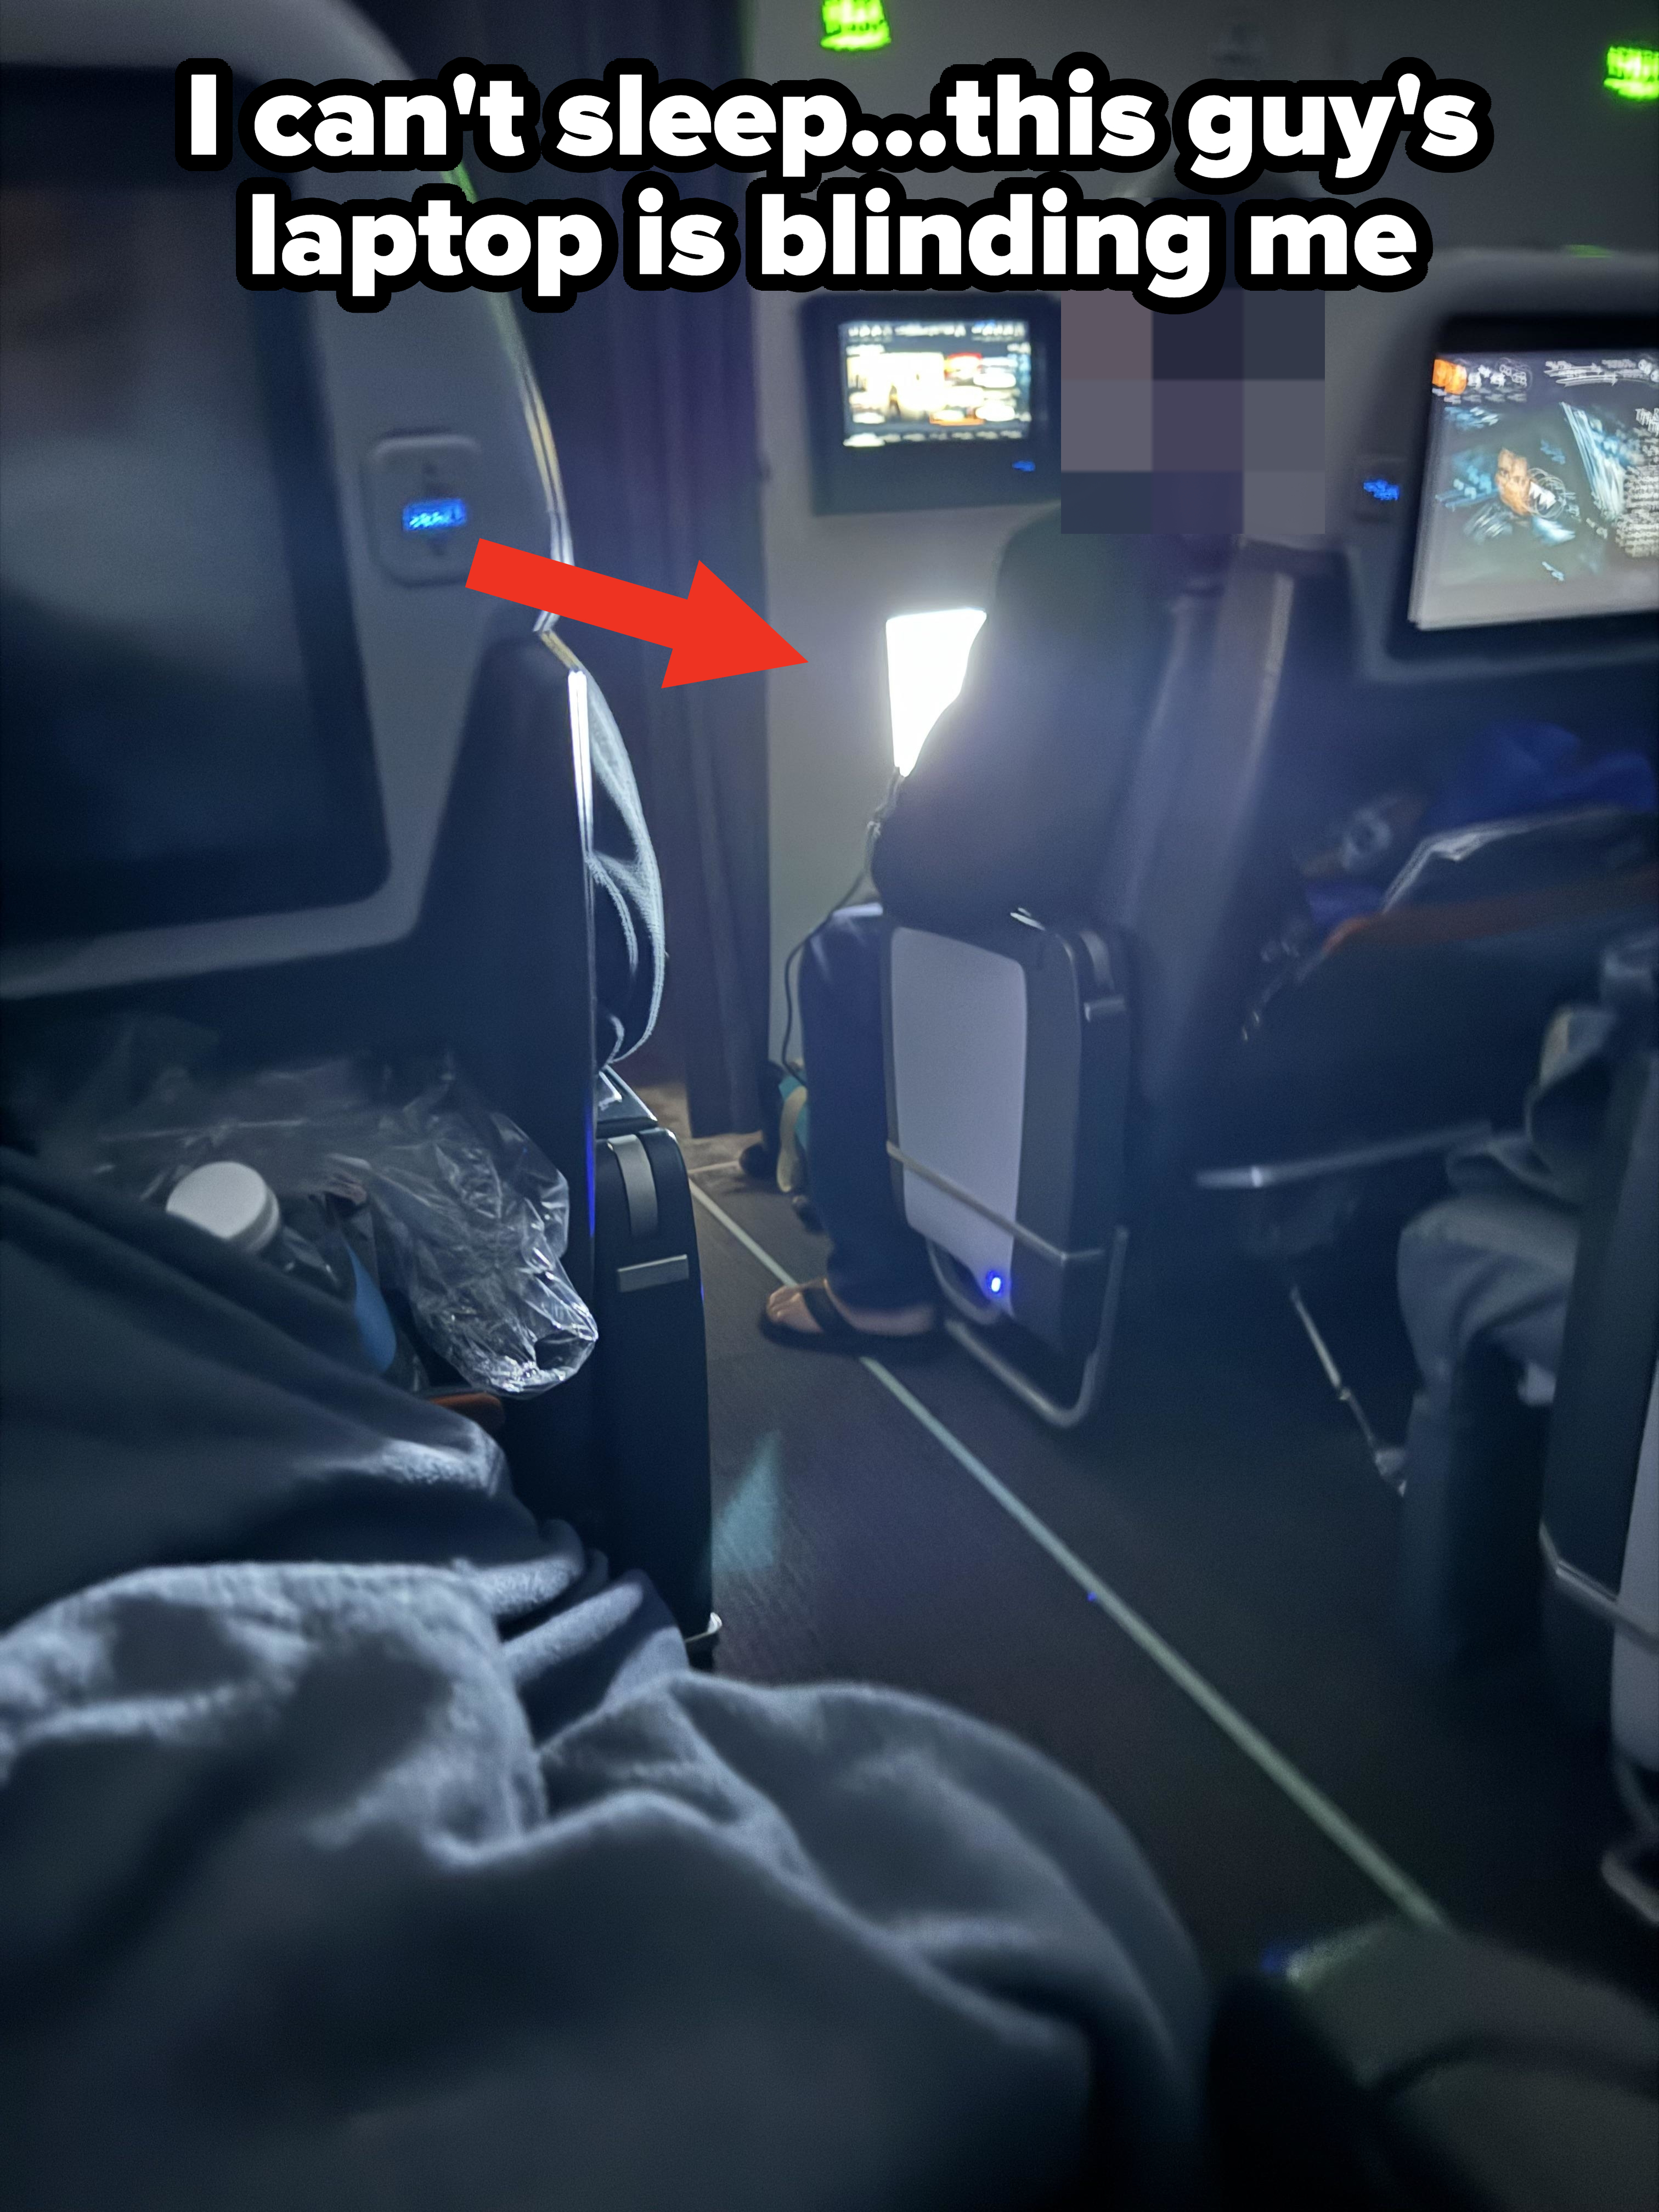 Passenger in an airplane seat in a dimly lit airplane with another very bright screen visible ahead with movie playing